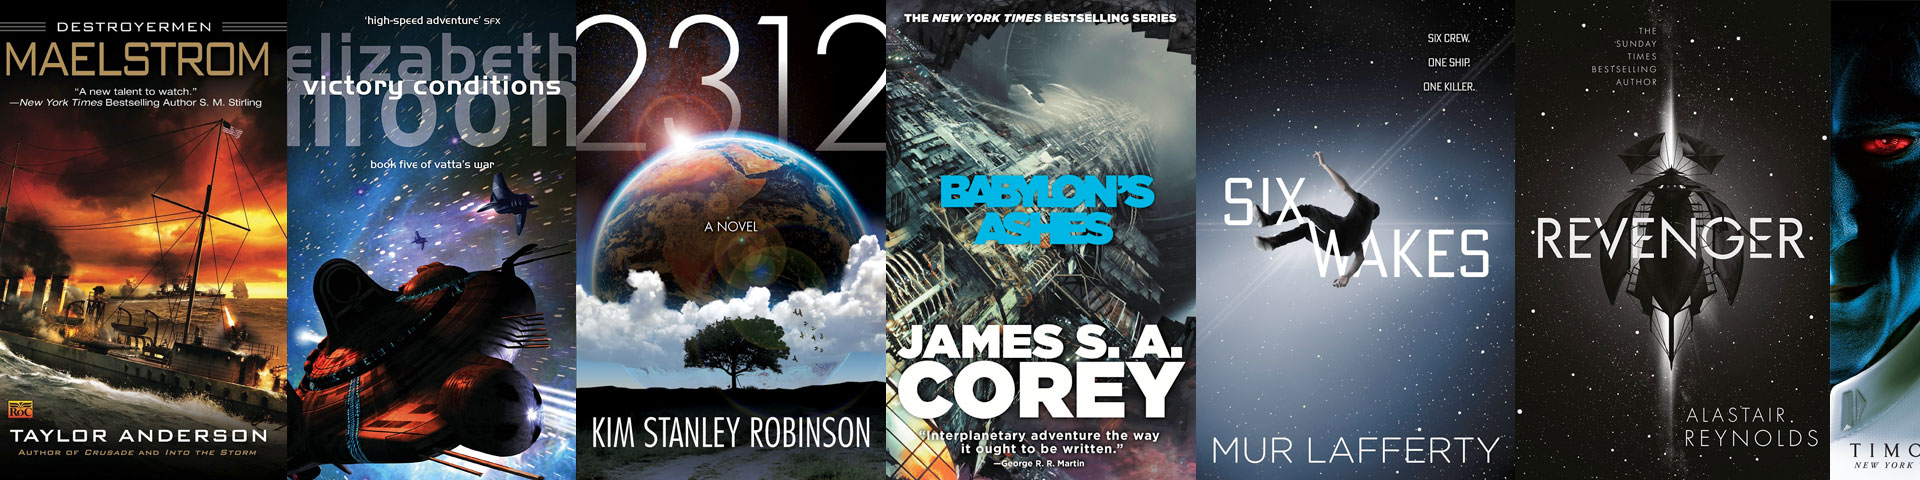 Several difference science fiction book covers shown side-by-side.